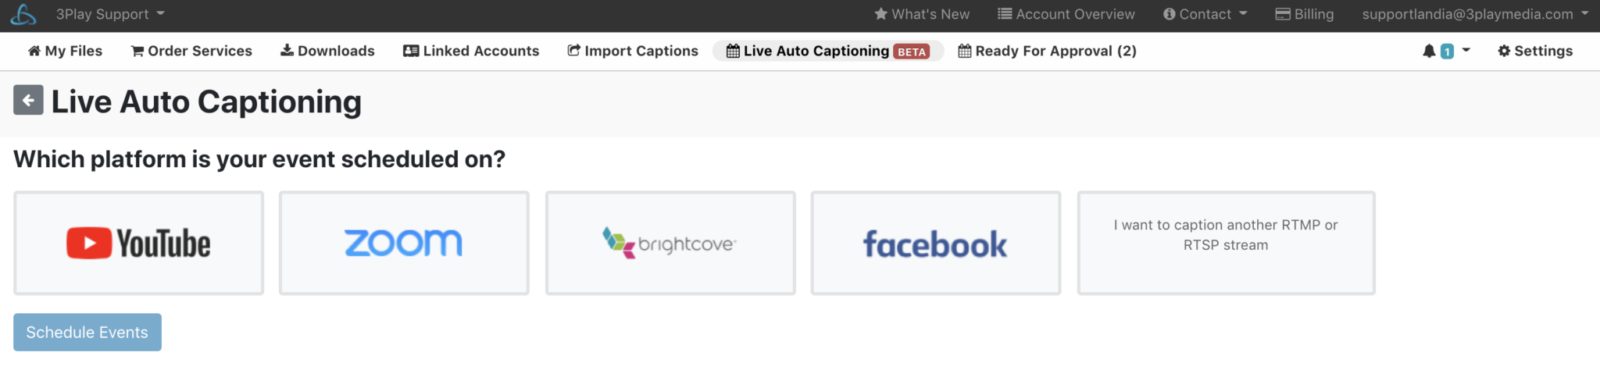 YouTube, Zoom, Brightcove, and Facebook logos